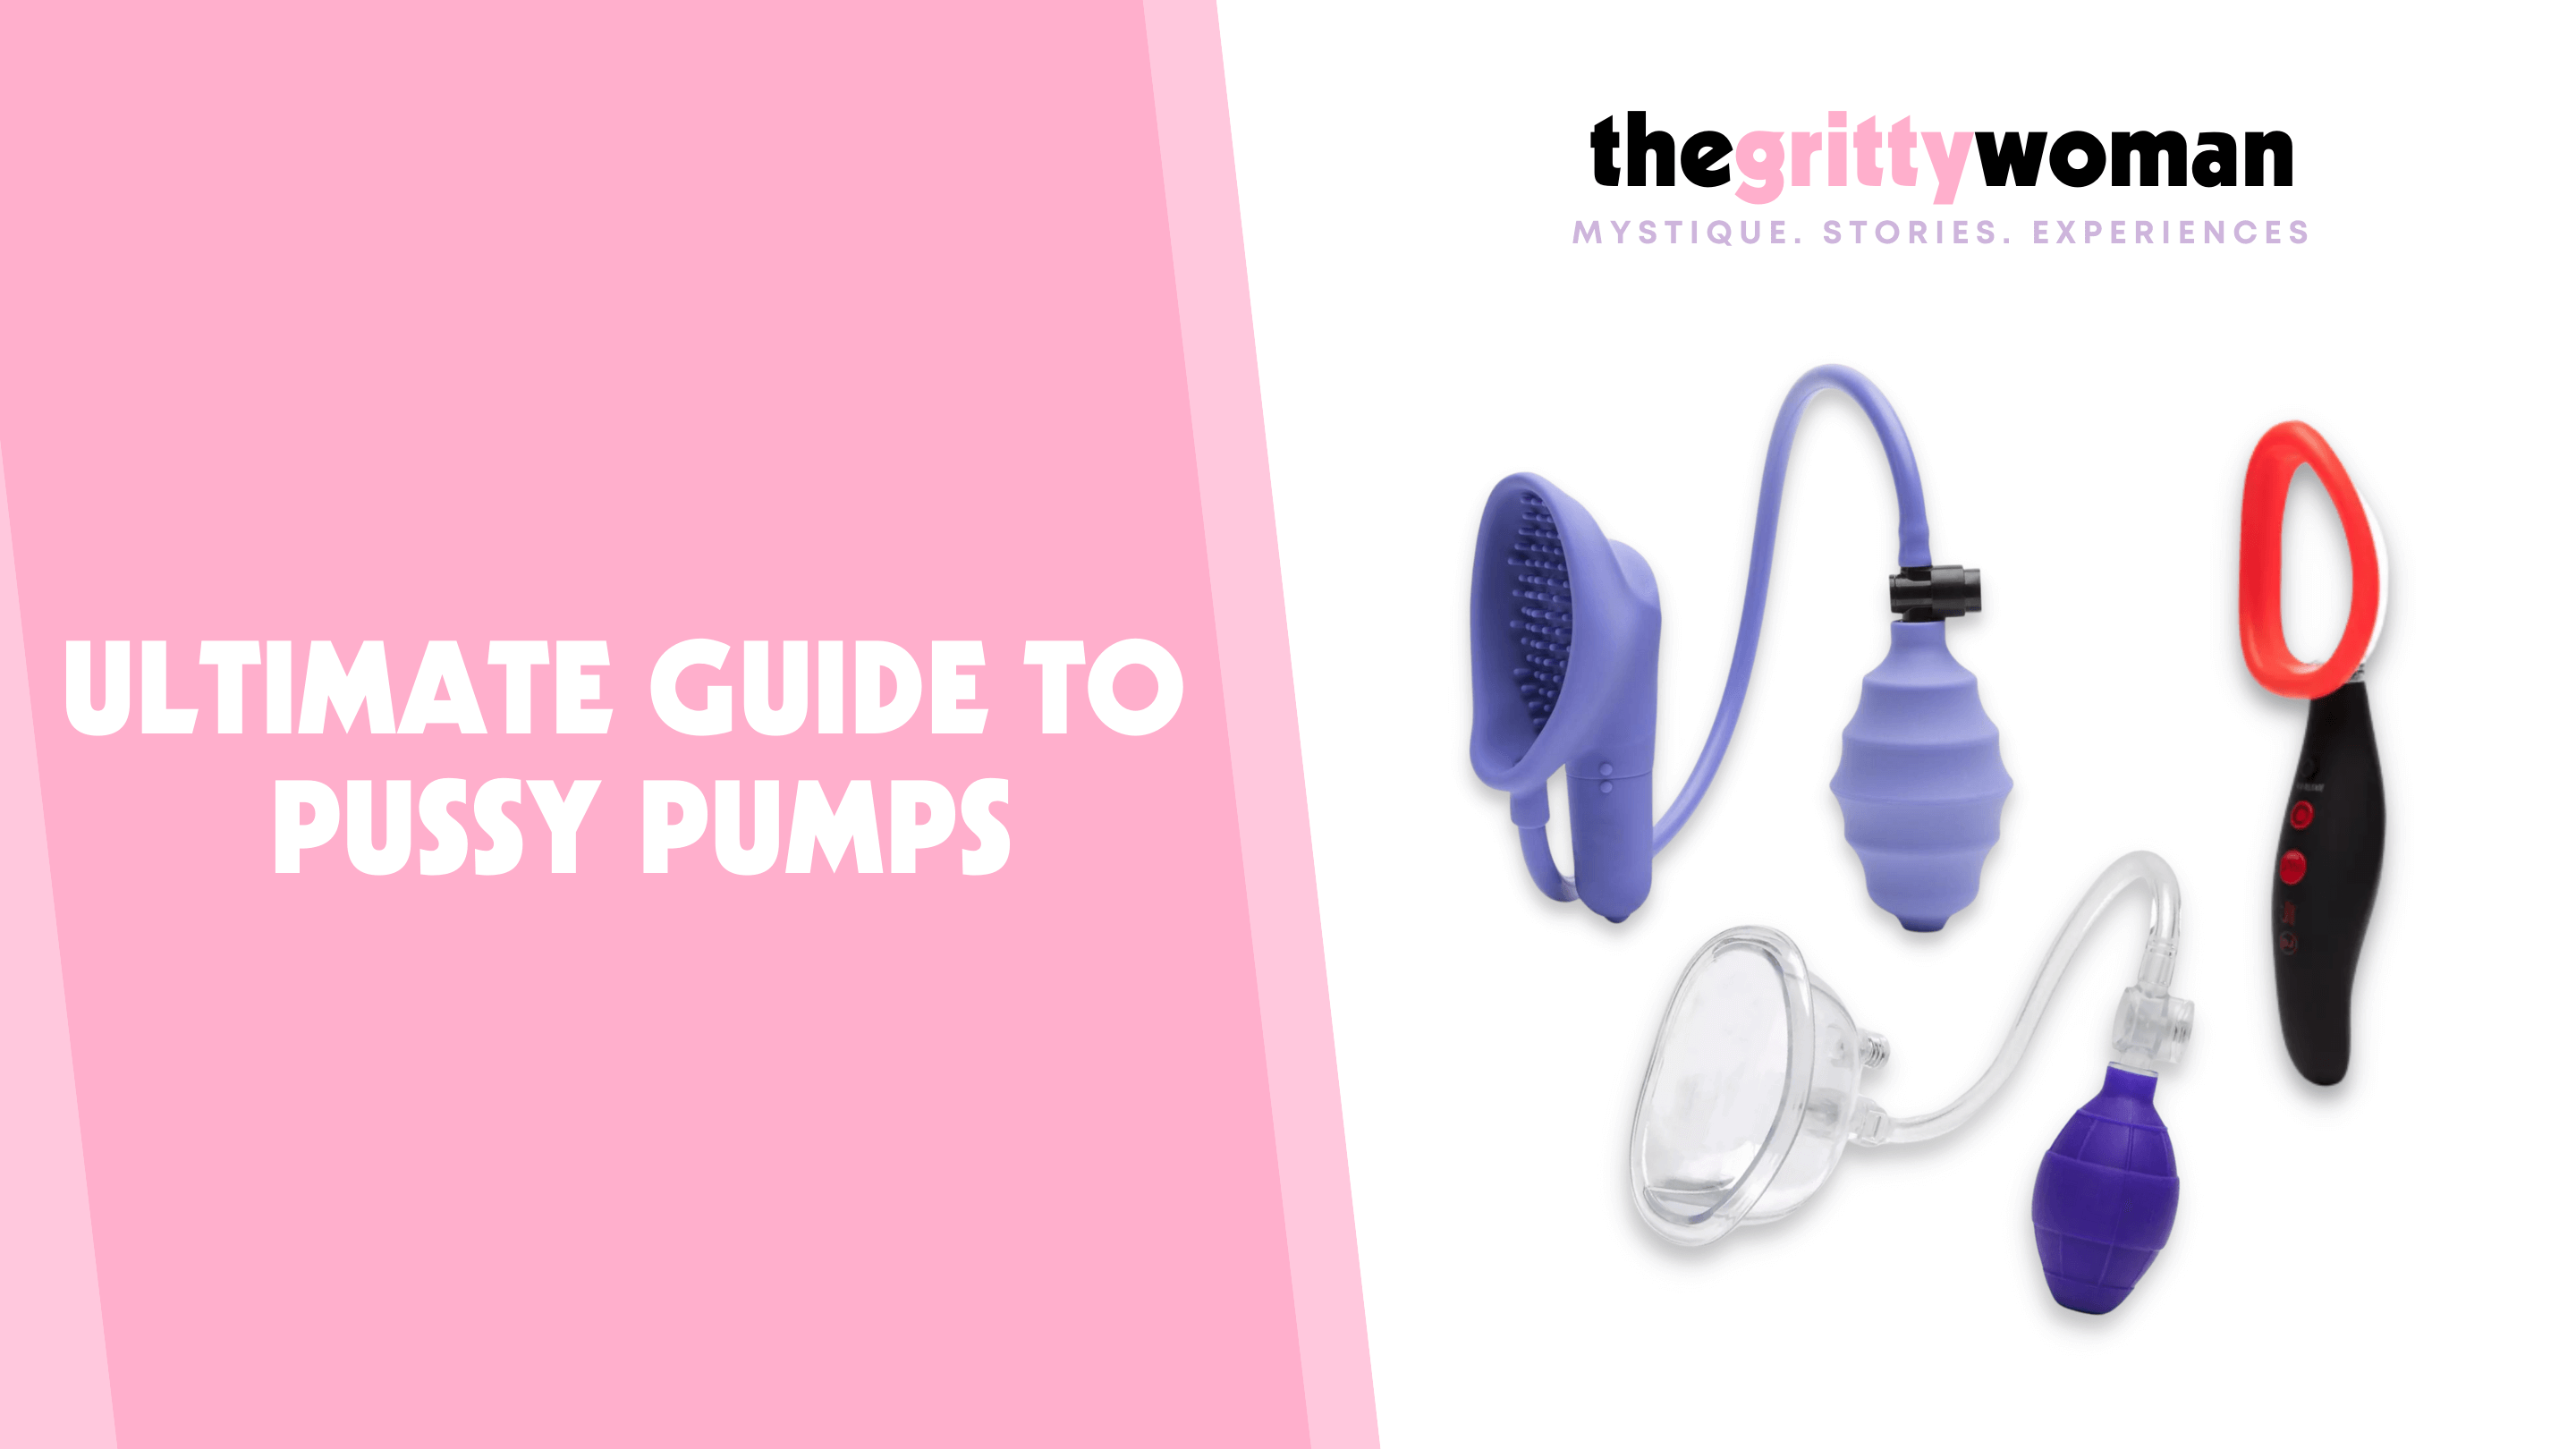 Images of Pussy pumps